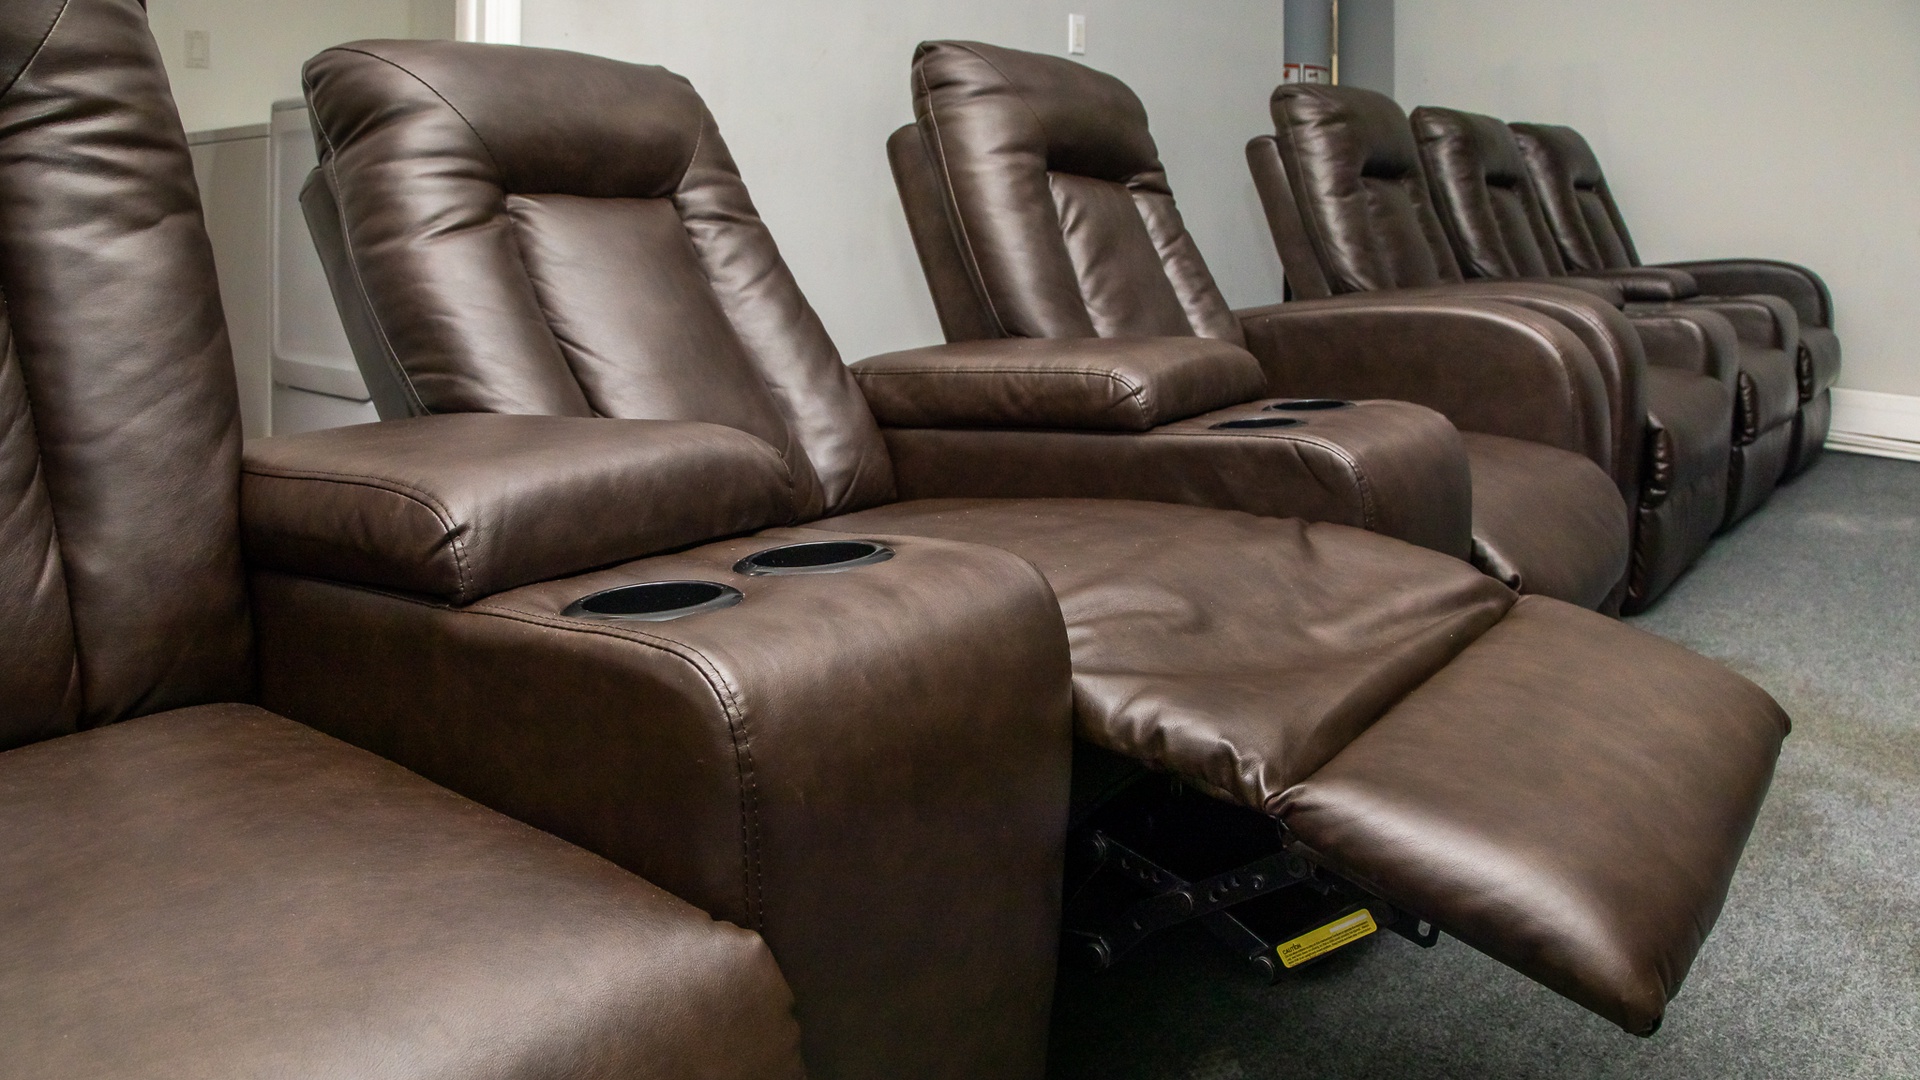 Theater-style lounge chairs in the game room